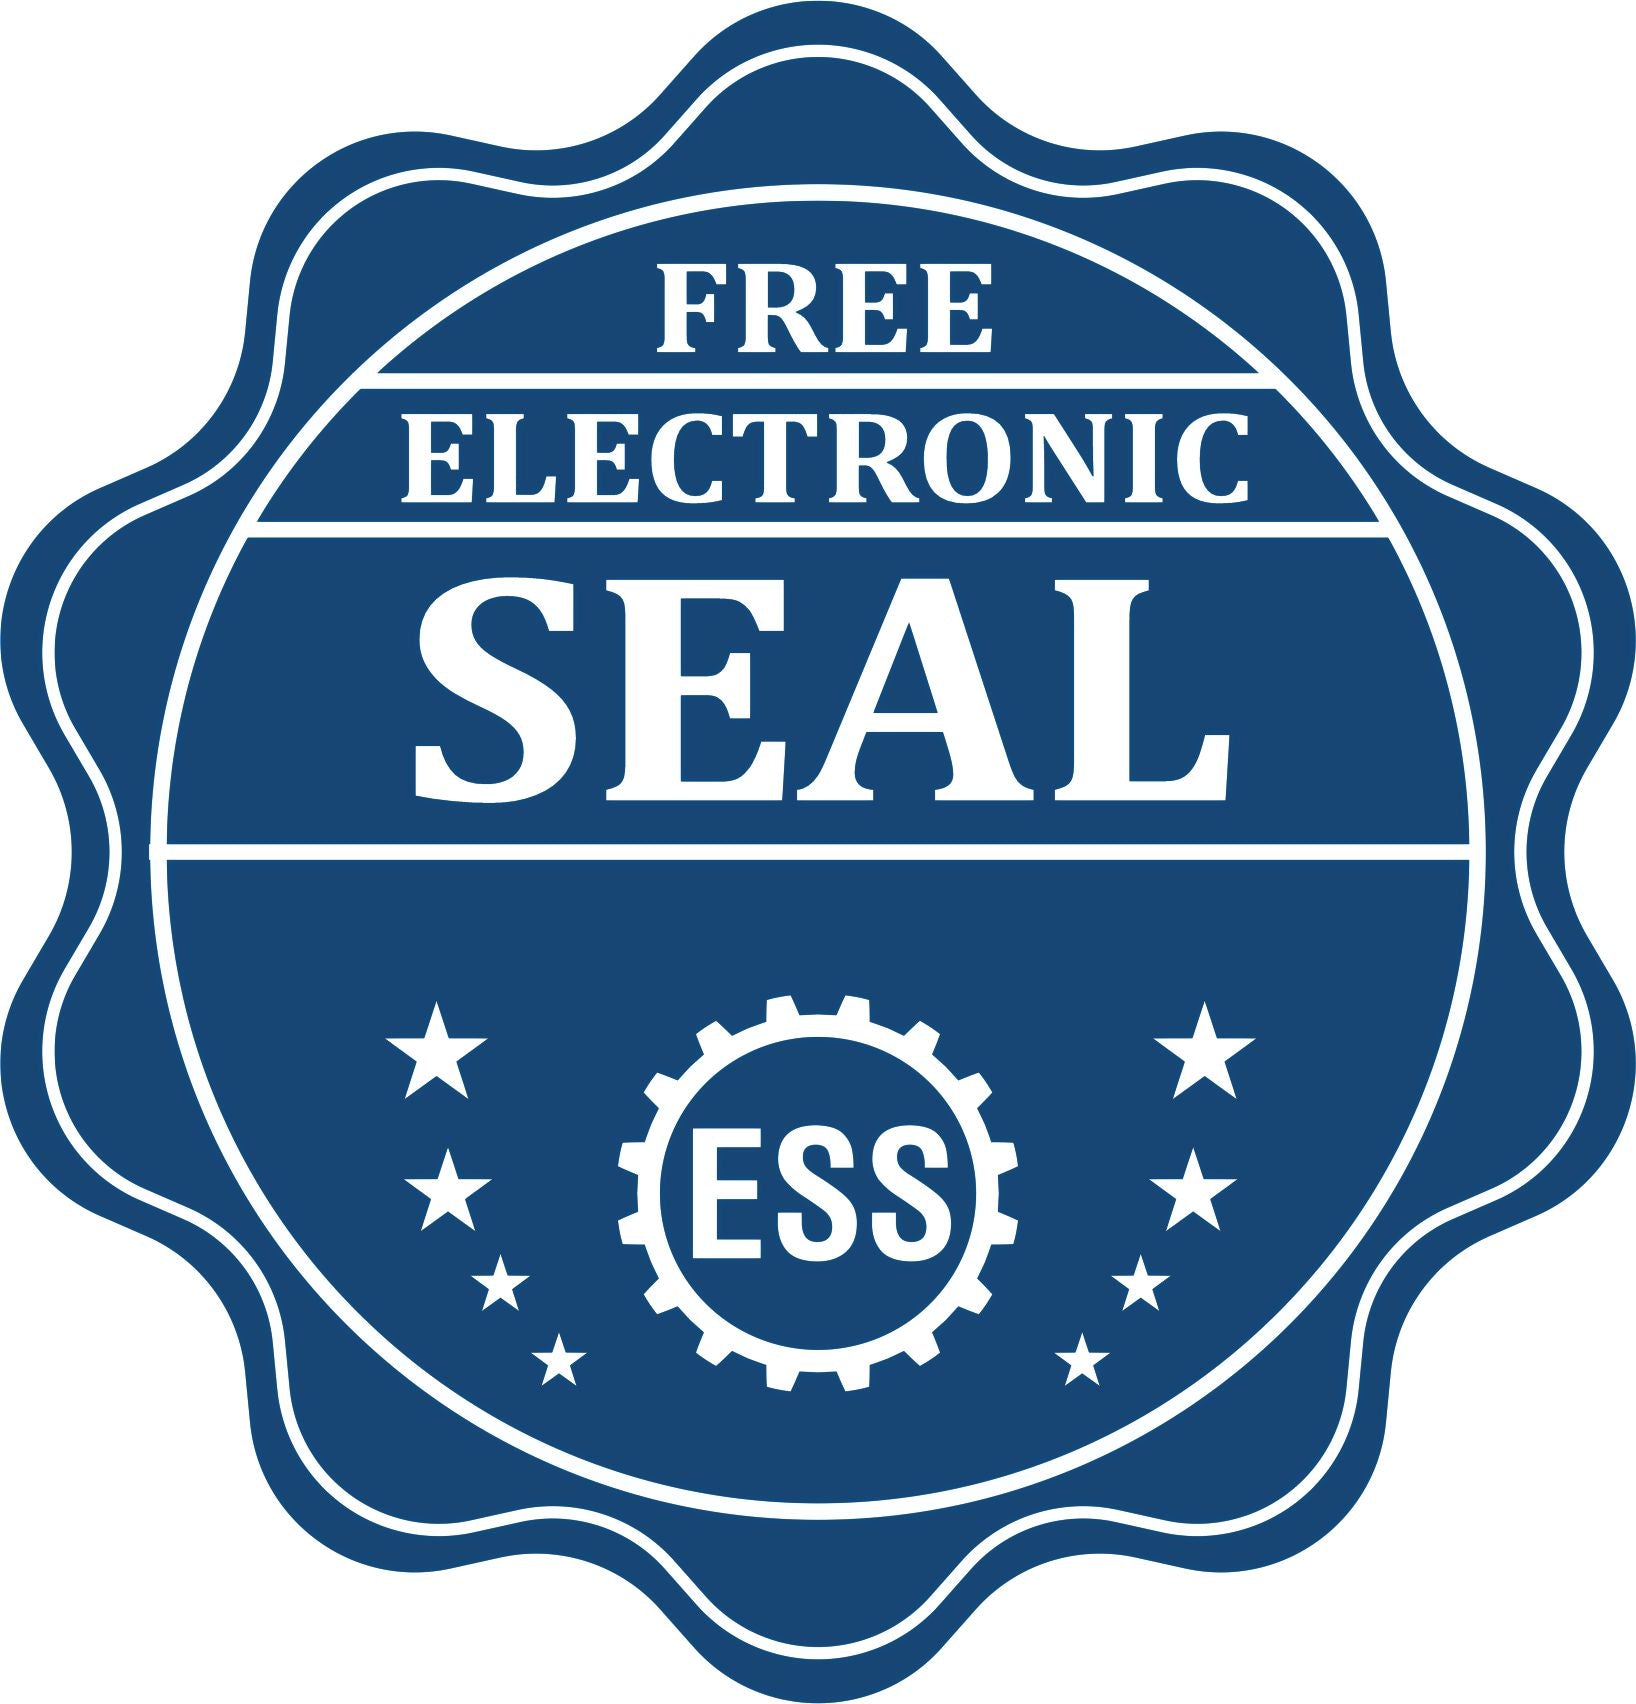 A badge showing a free electronic seal for the Premium MaxLight Pre-Inked Iowa Landscape Architectural Stamp with stars and the ESS gear on the emblem.